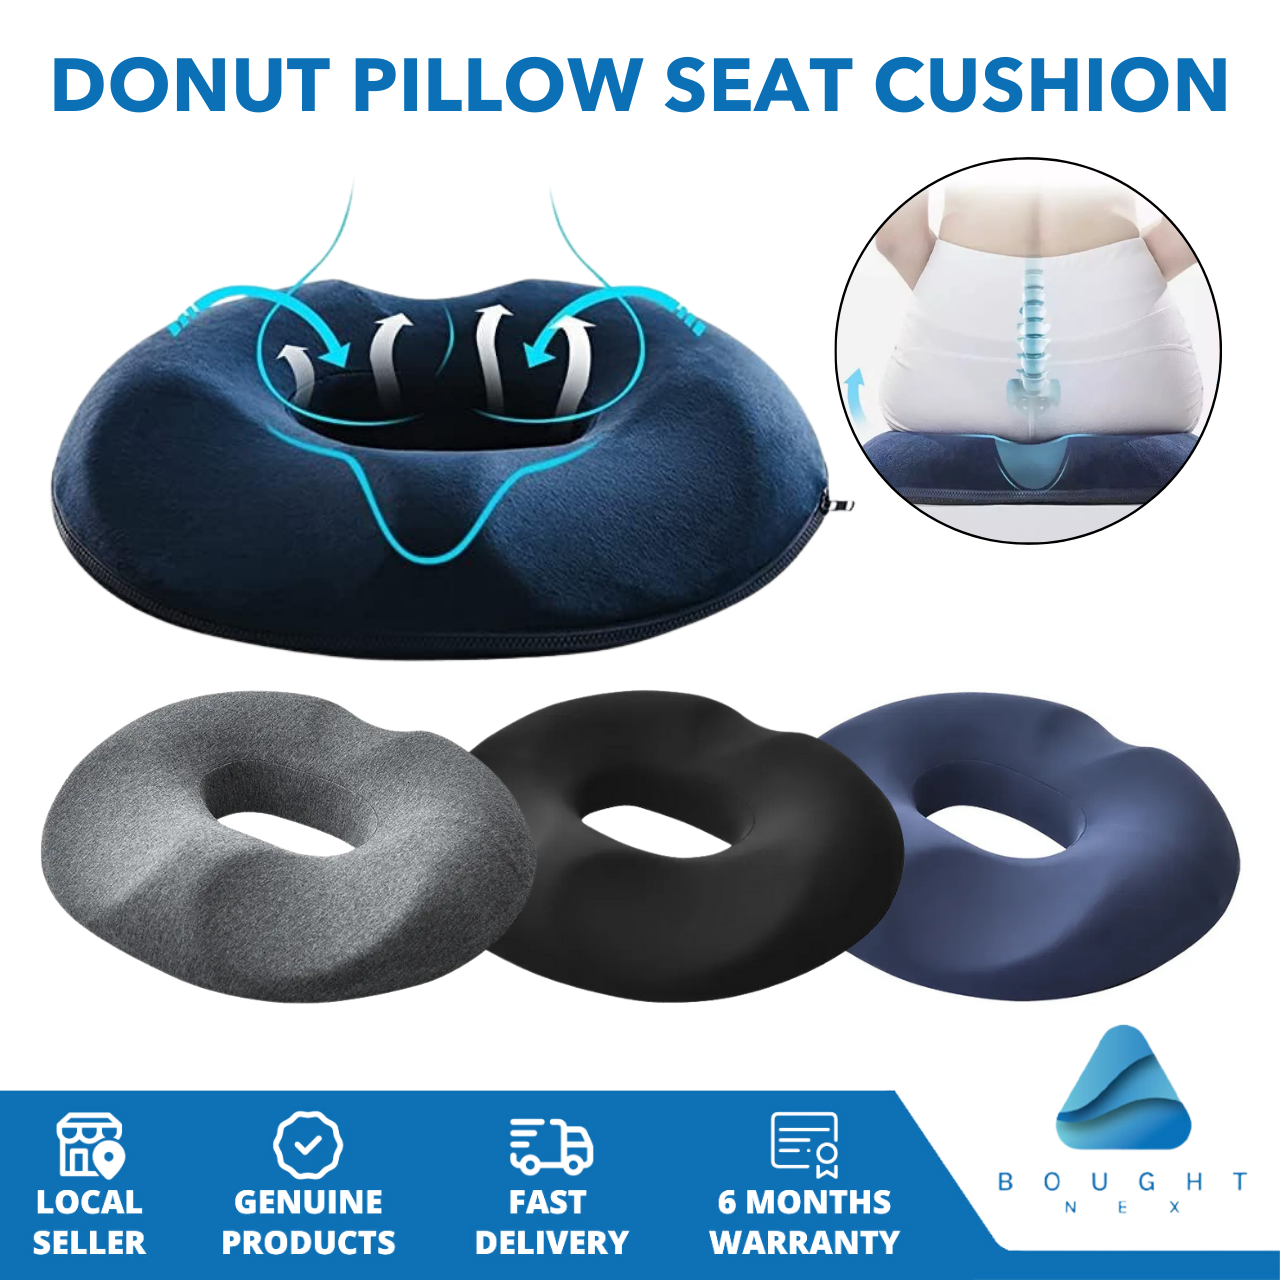 MEDPRO™ Memory Foam Donut Ring Seat Cushion For Pain Relief / Haemorrhoid 